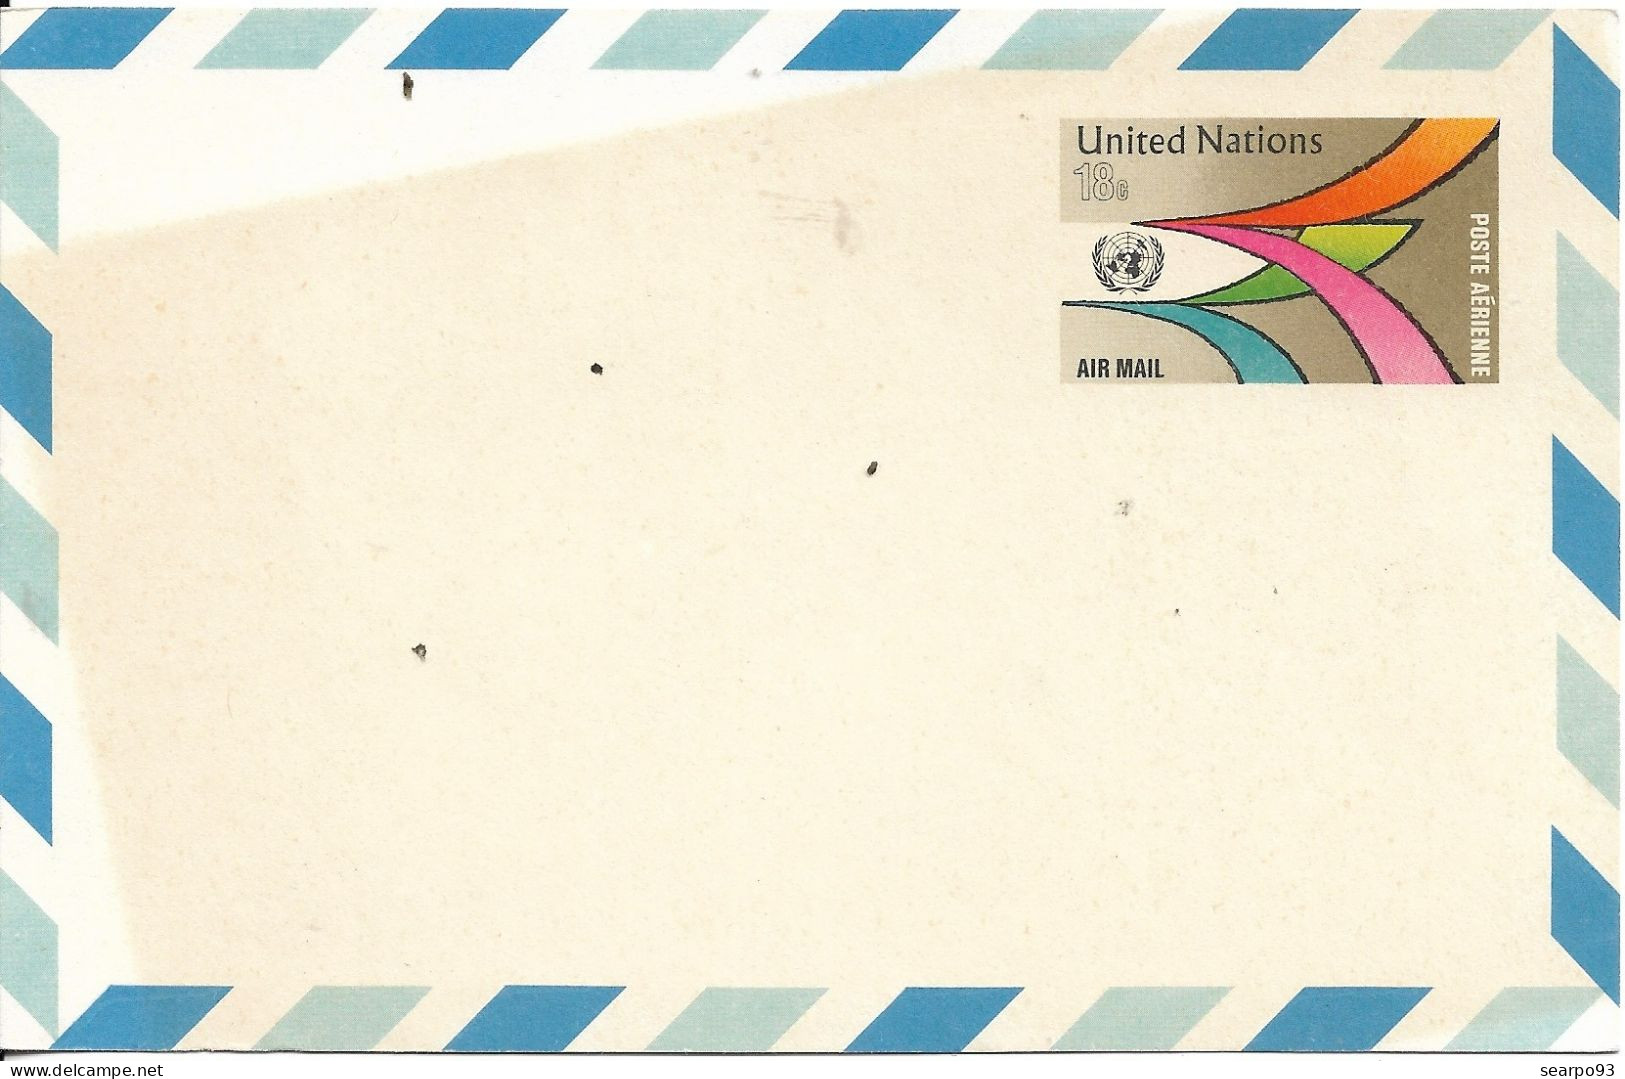 UNITED NATIONS. AIR LETTER. POSTAL STATIONERY - Airmail